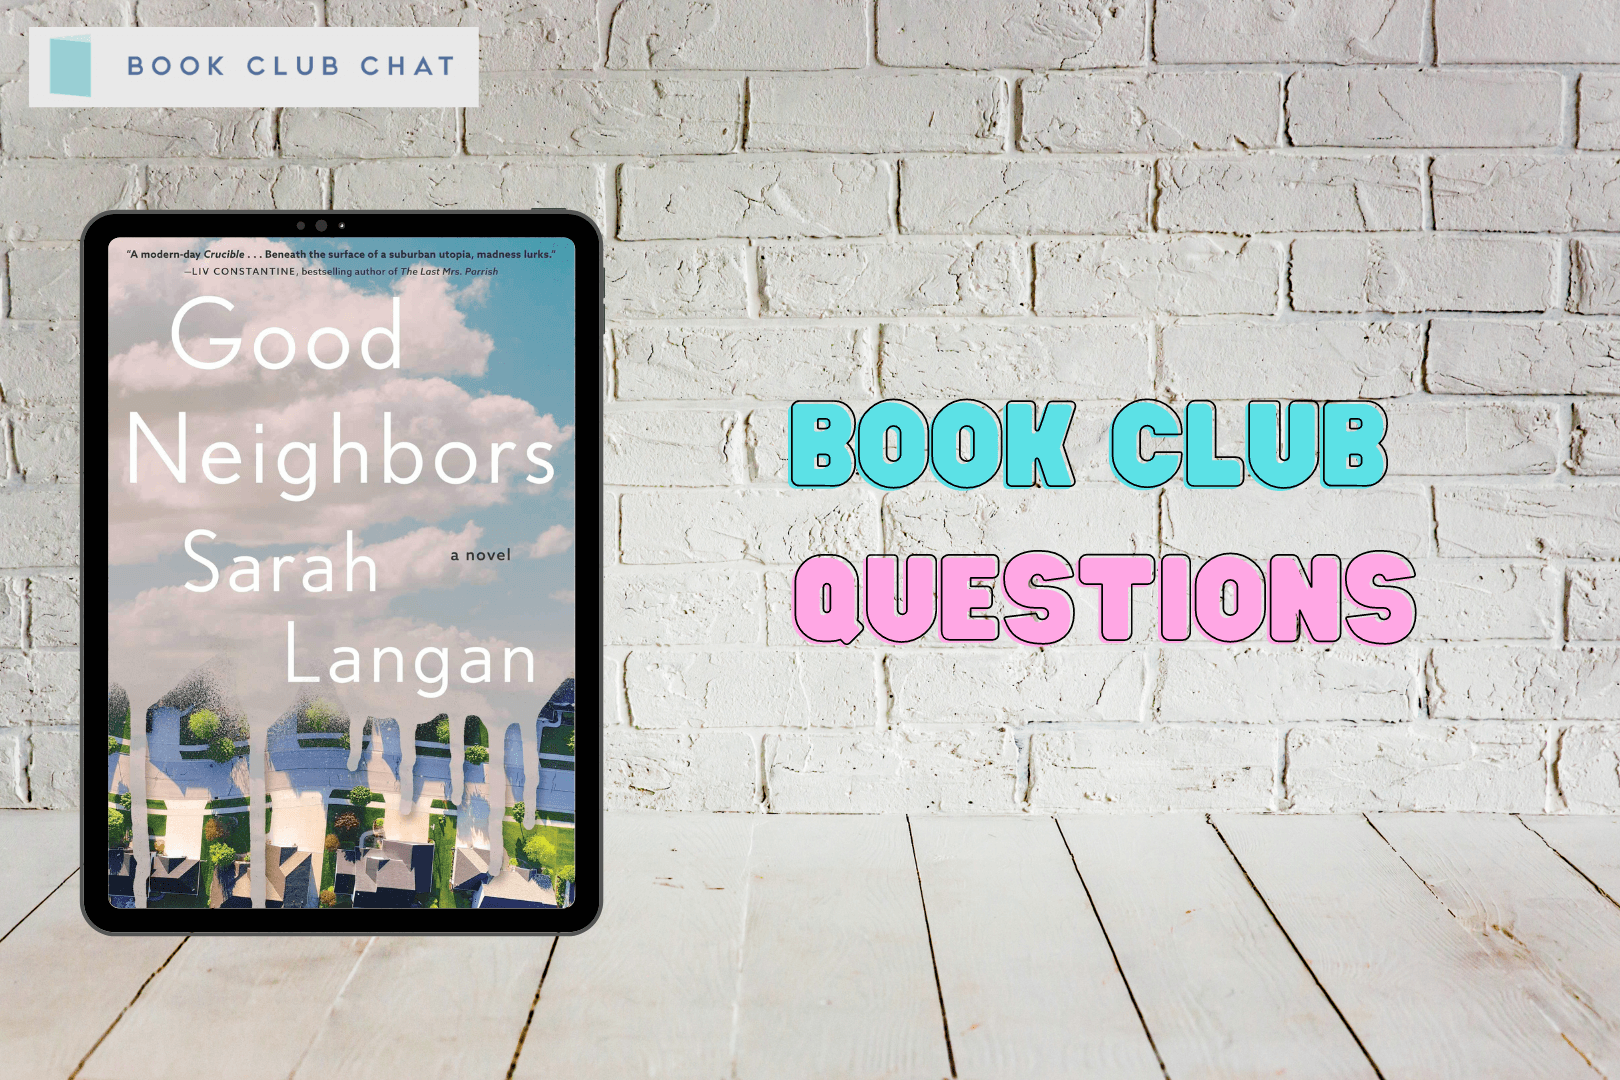 Book Club Questions for Good Neighbors by Sarah Langan